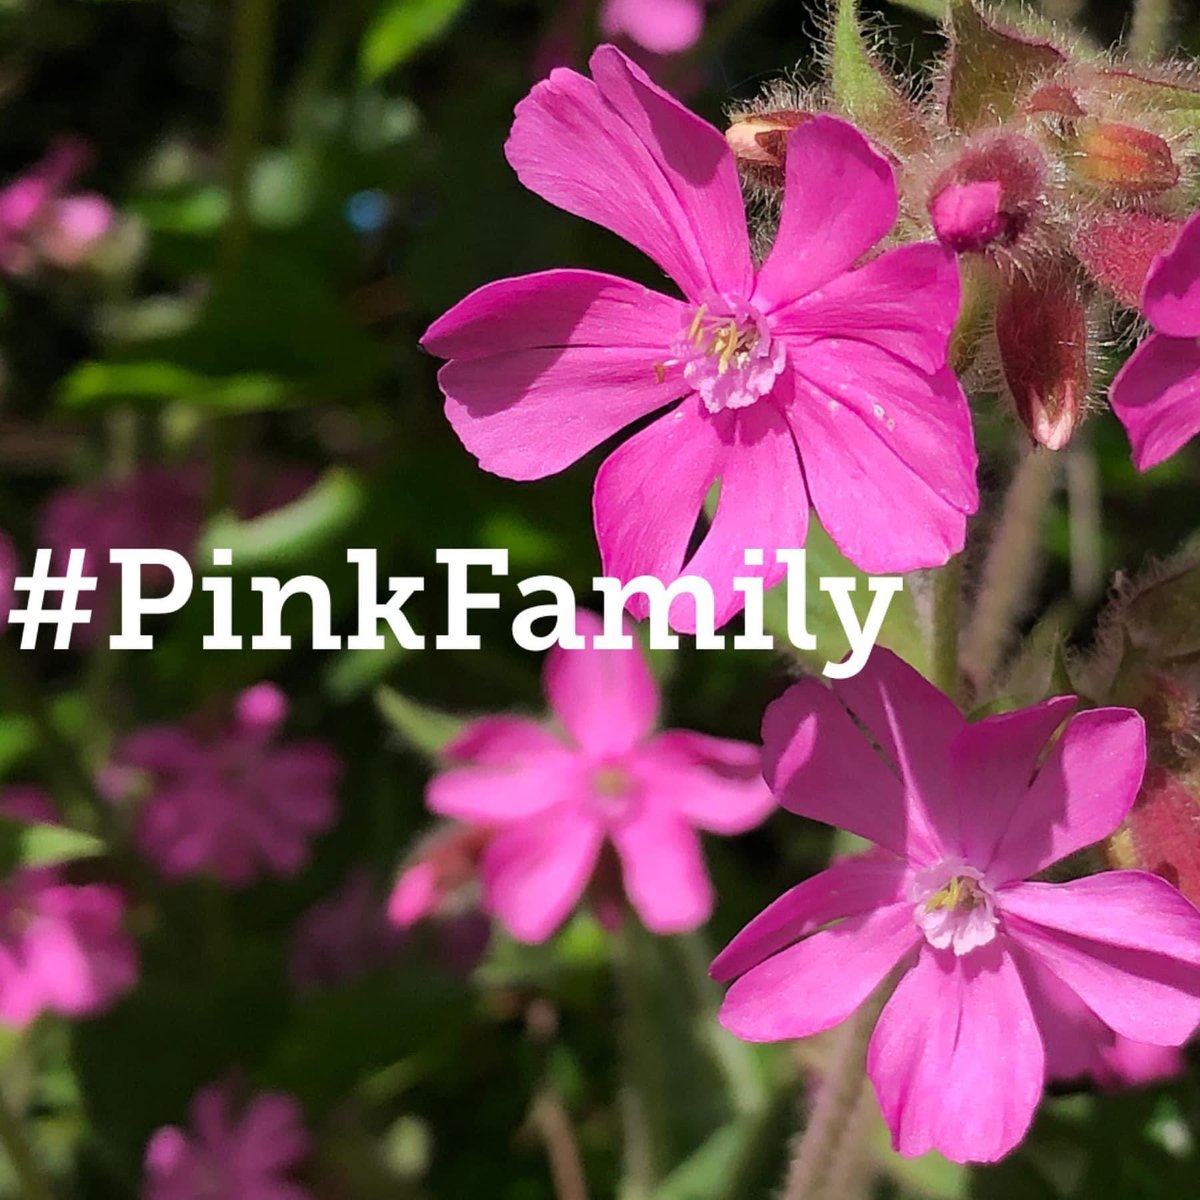 Campion, Chickweed, Ragged Robin, Sandwort, Stitchwort and Mouse-ear are just some of the lovely members of the Pink Family or Caryophyllaceae! Find one blooming for this week’s challenge & share for #WildflowerHour this Sunday 8-9pm using the hashtag #PinkFamily 🌸